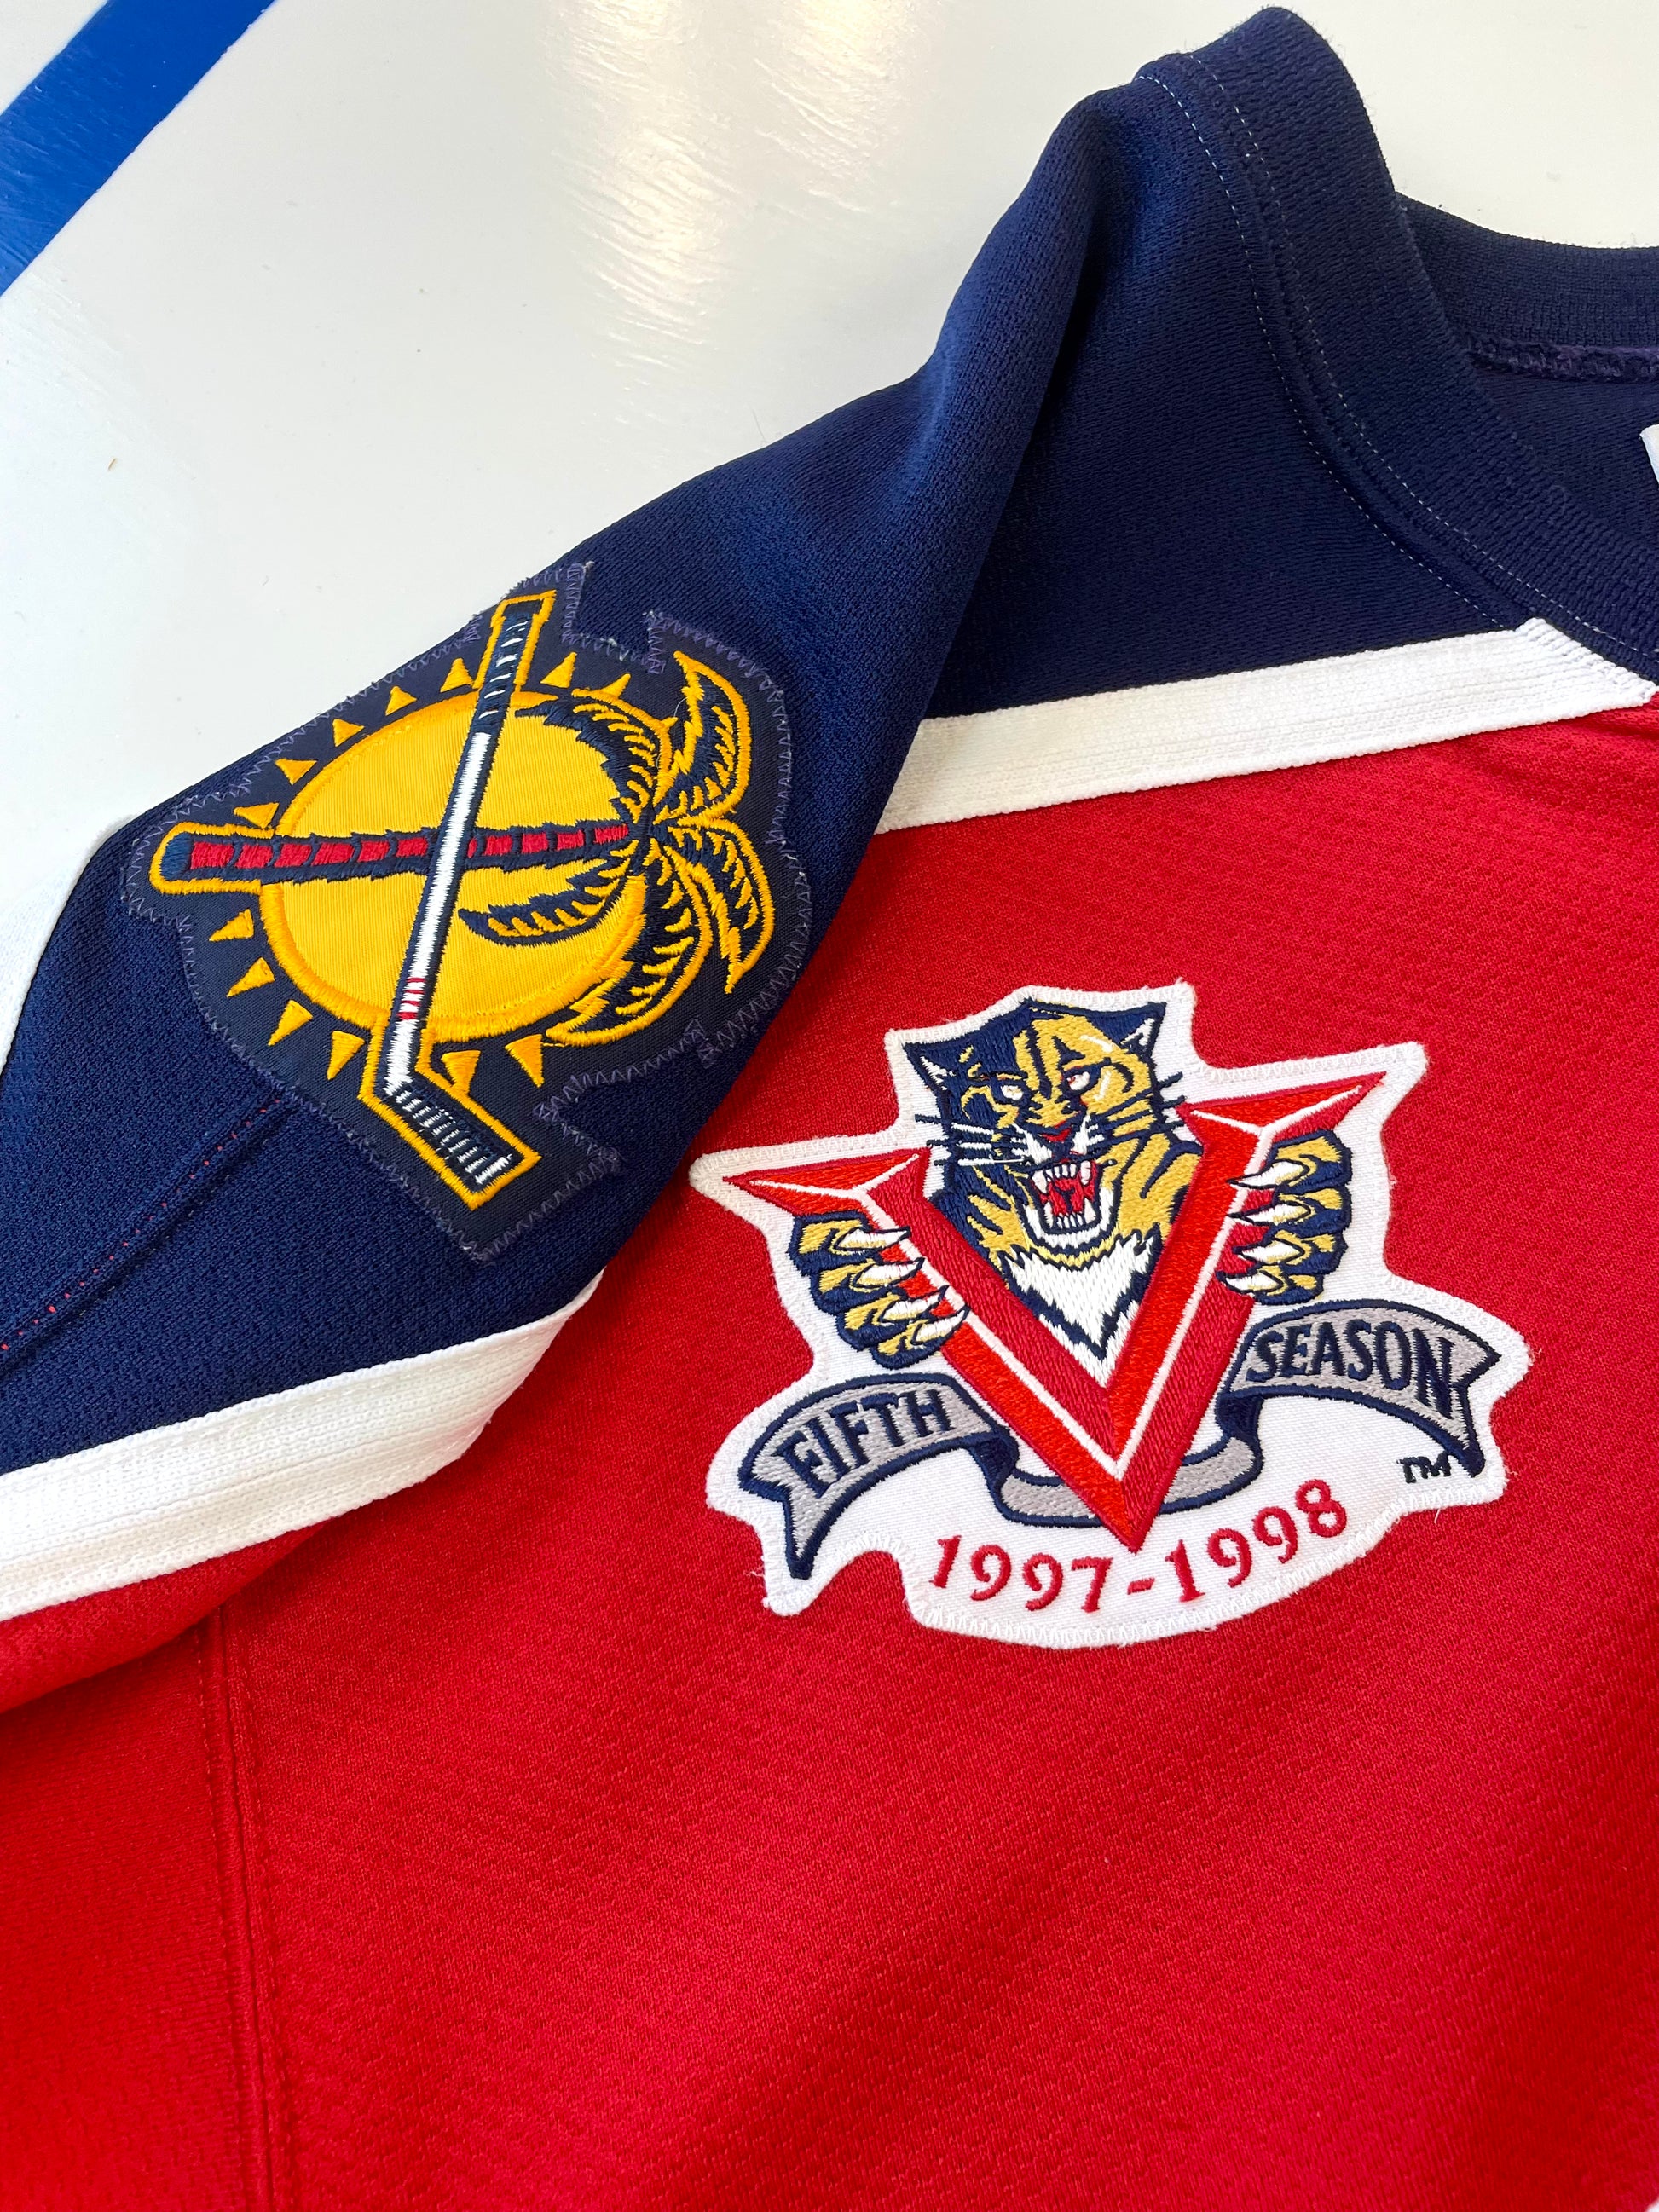 Adidas hints at 'Reverse Retro' jersey look for Florida Panthers